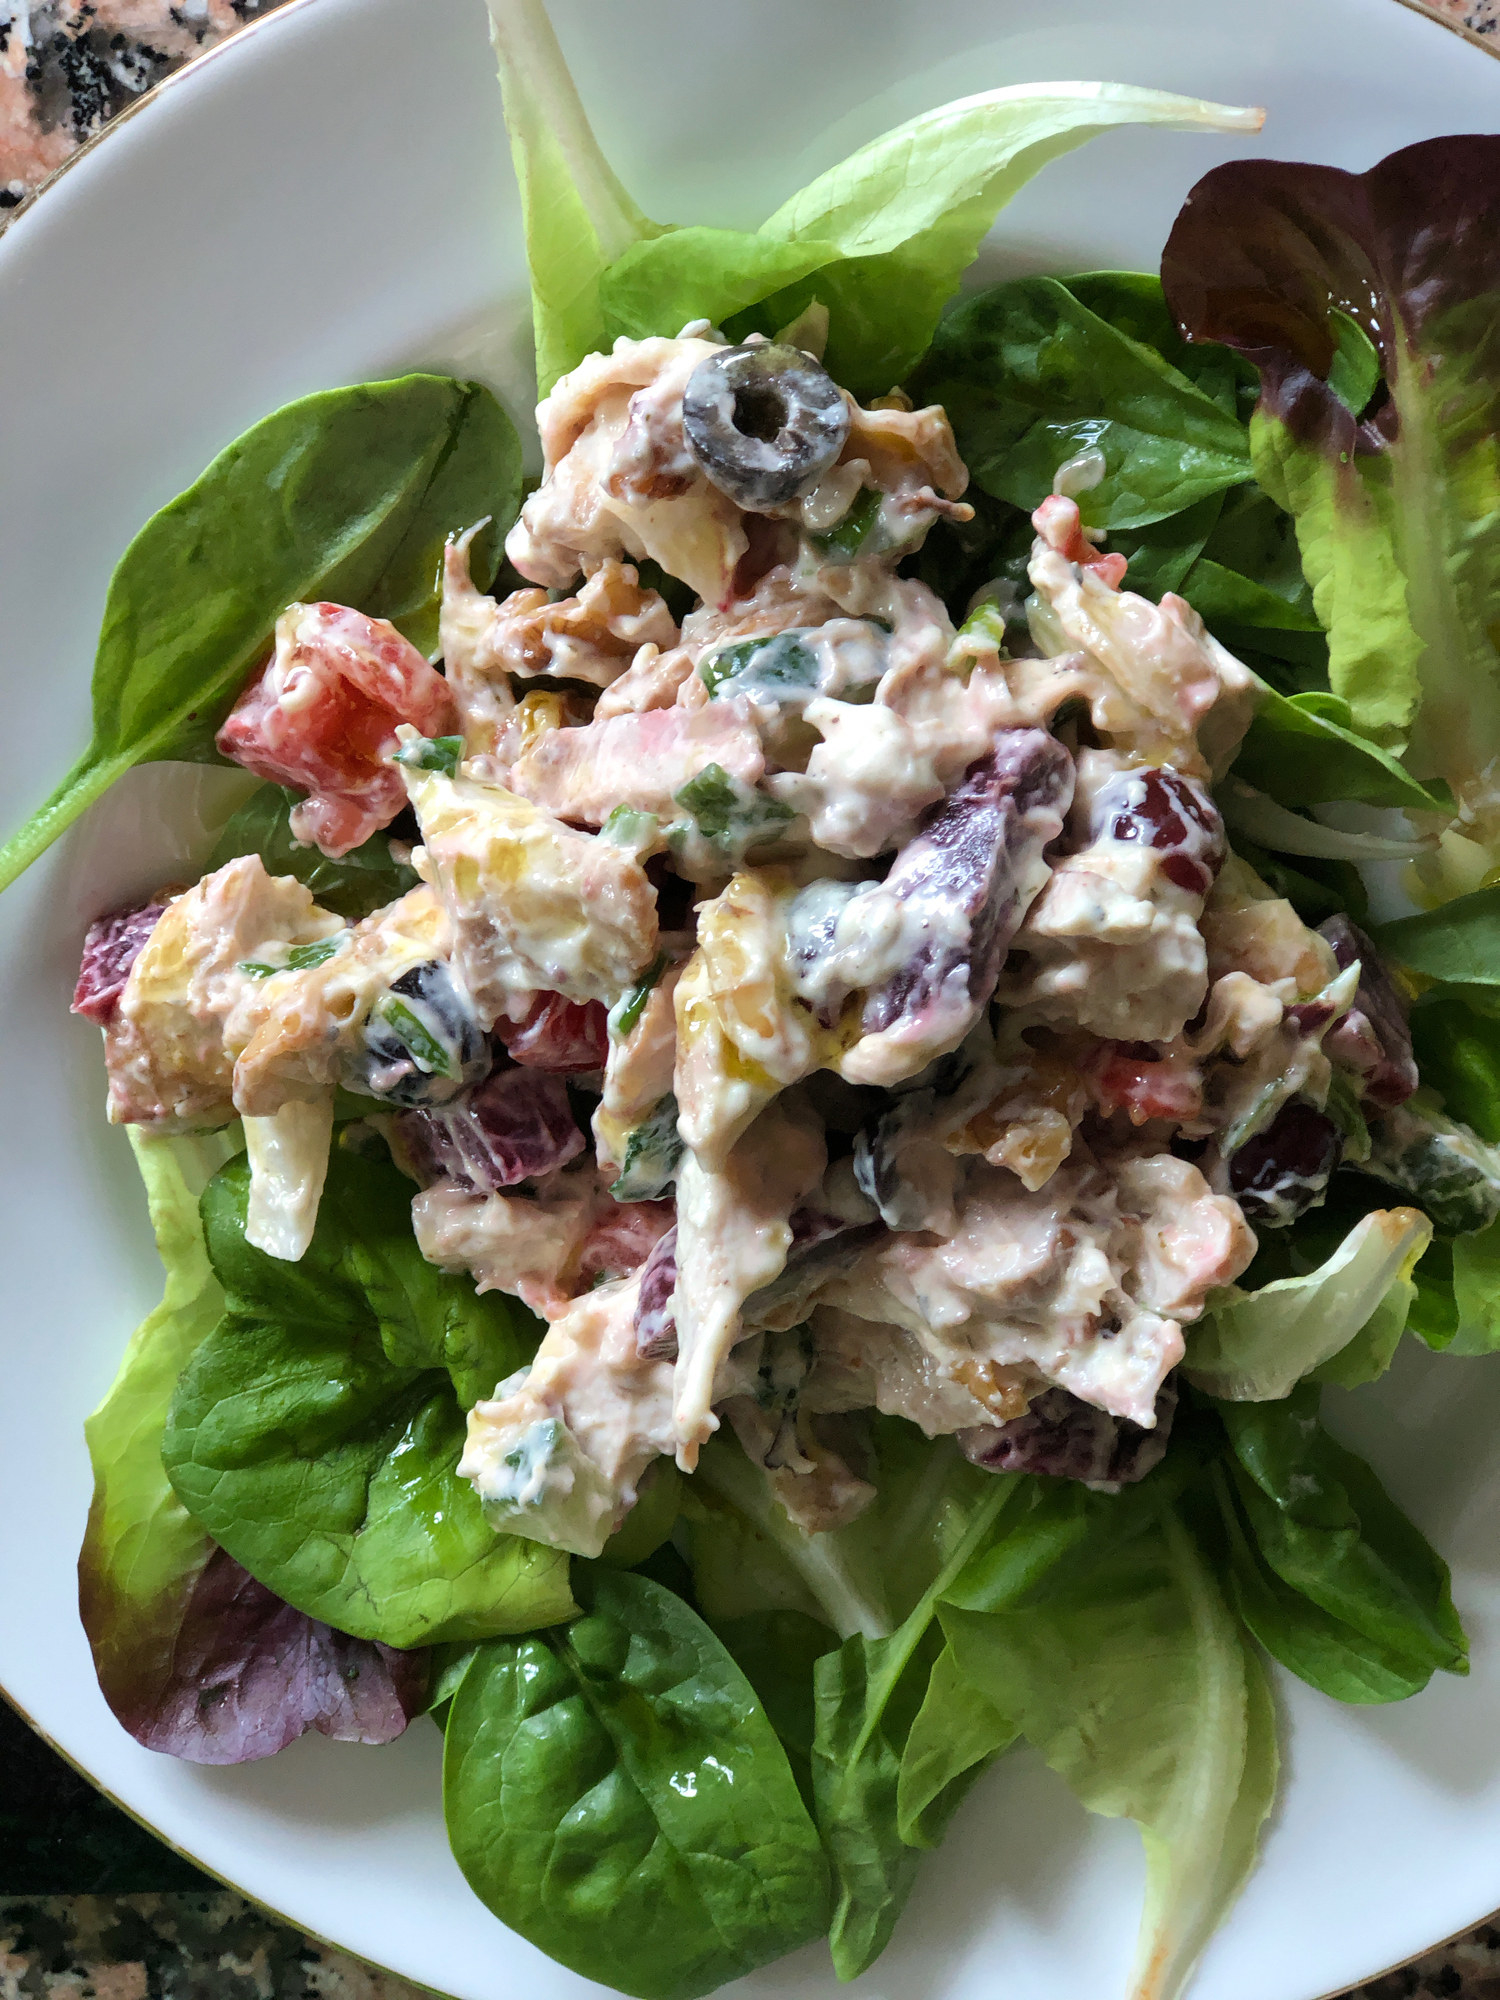 Chicken salad on a bed of spinach.